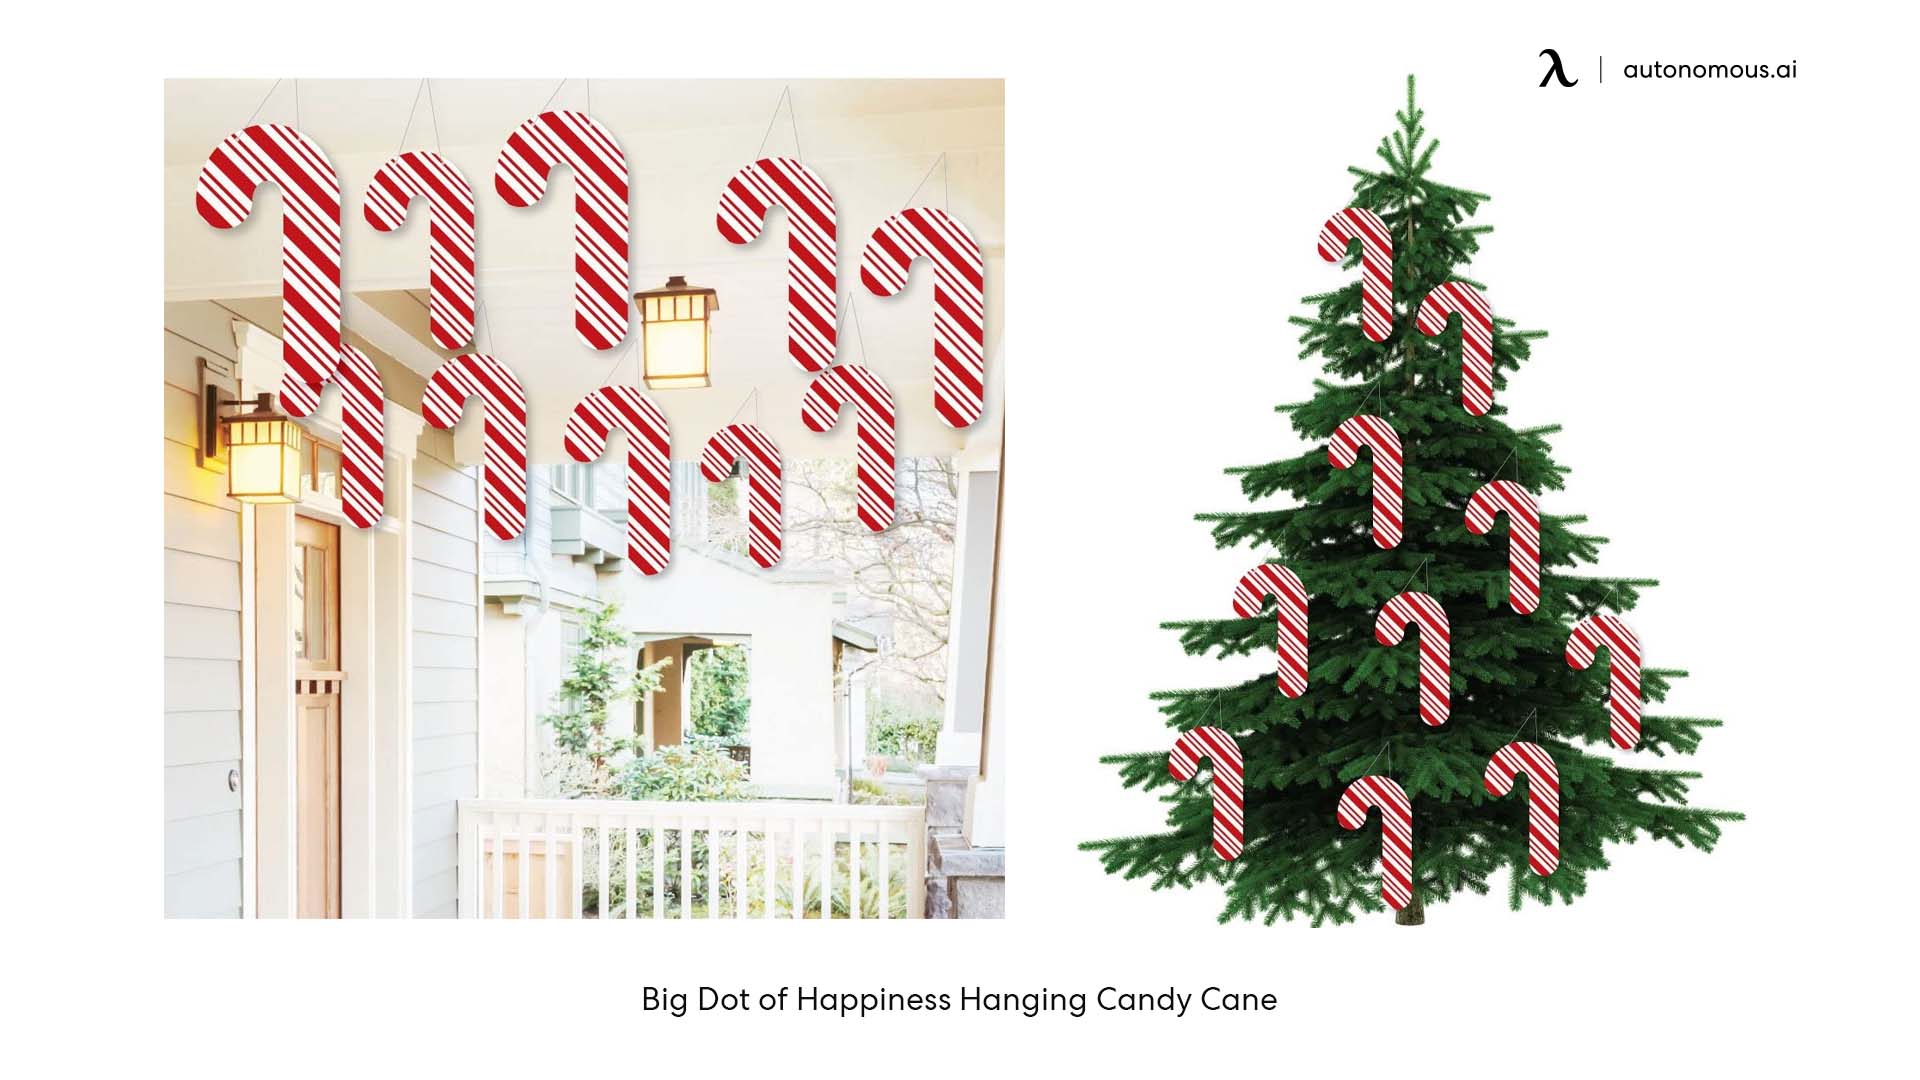 Candy cane ceilings hangers